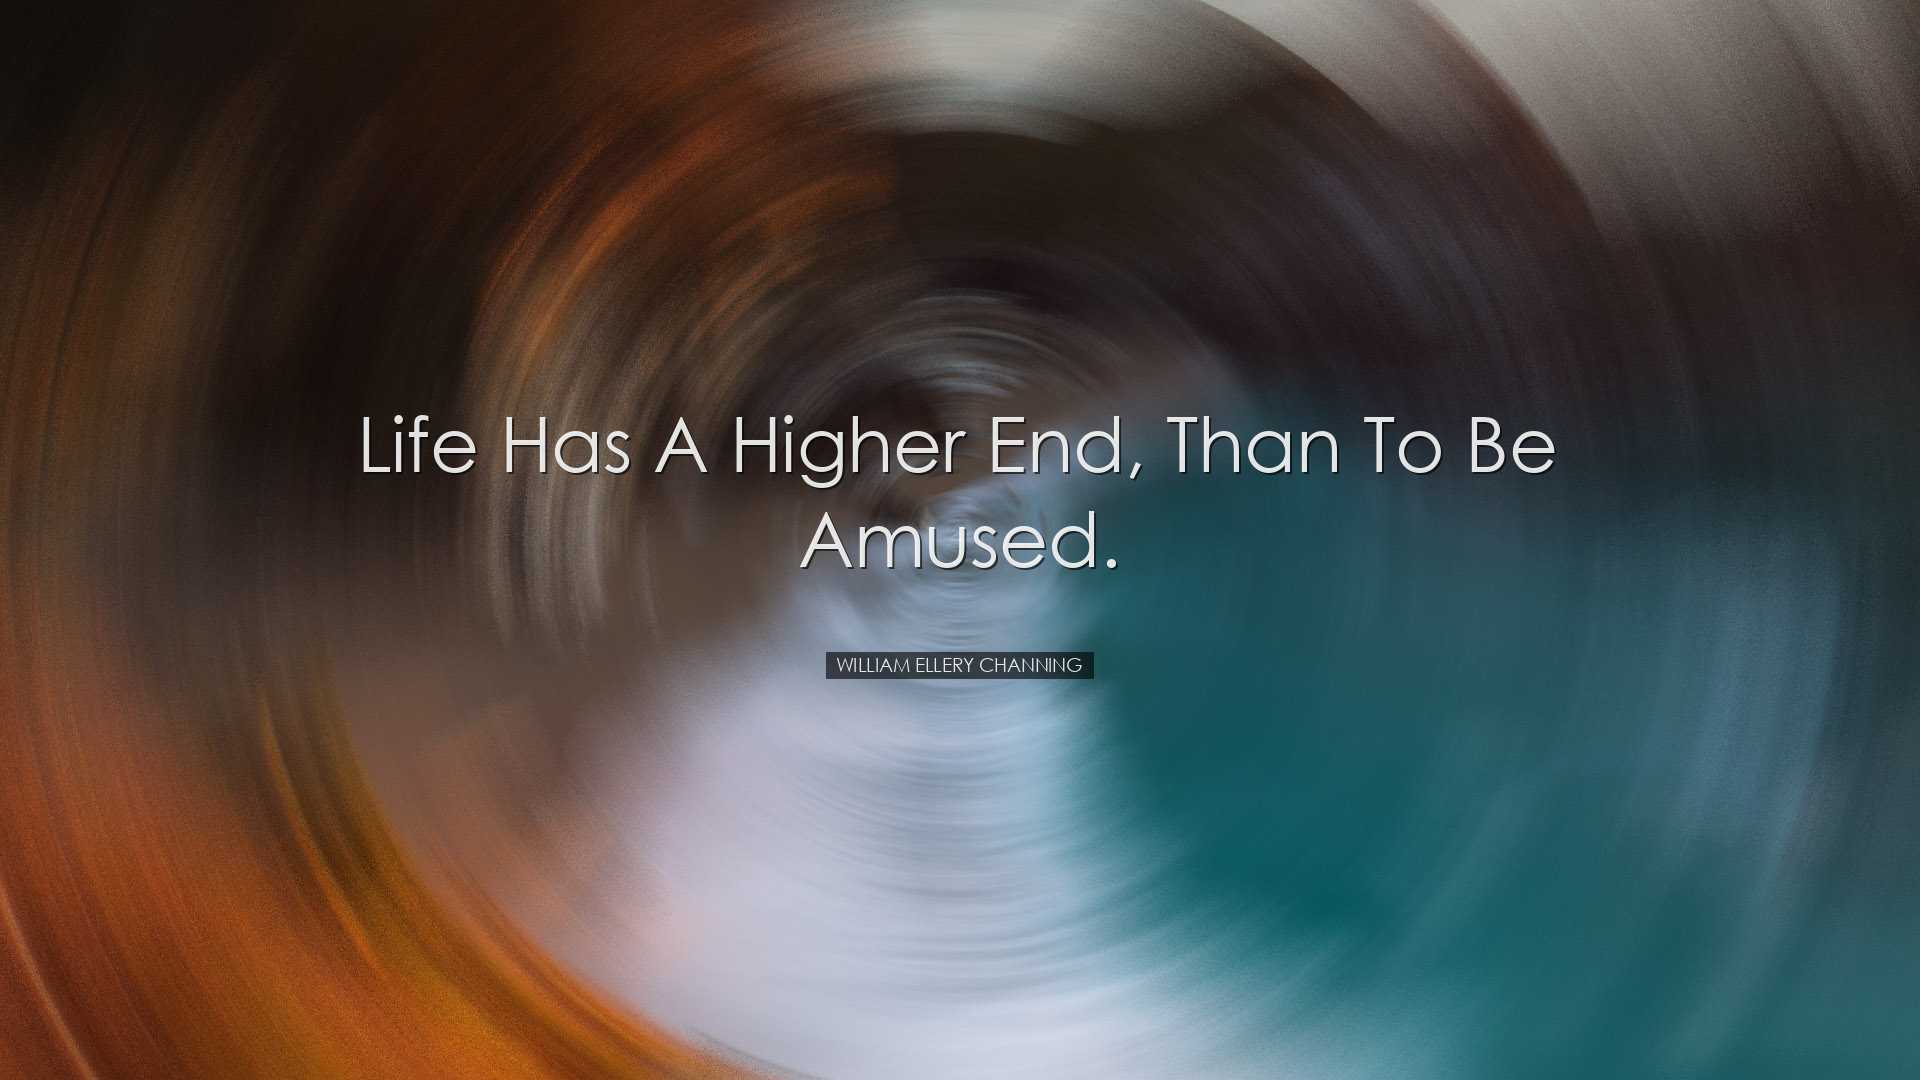 Life has a higher end, than to be amused. - William Ellery Channin